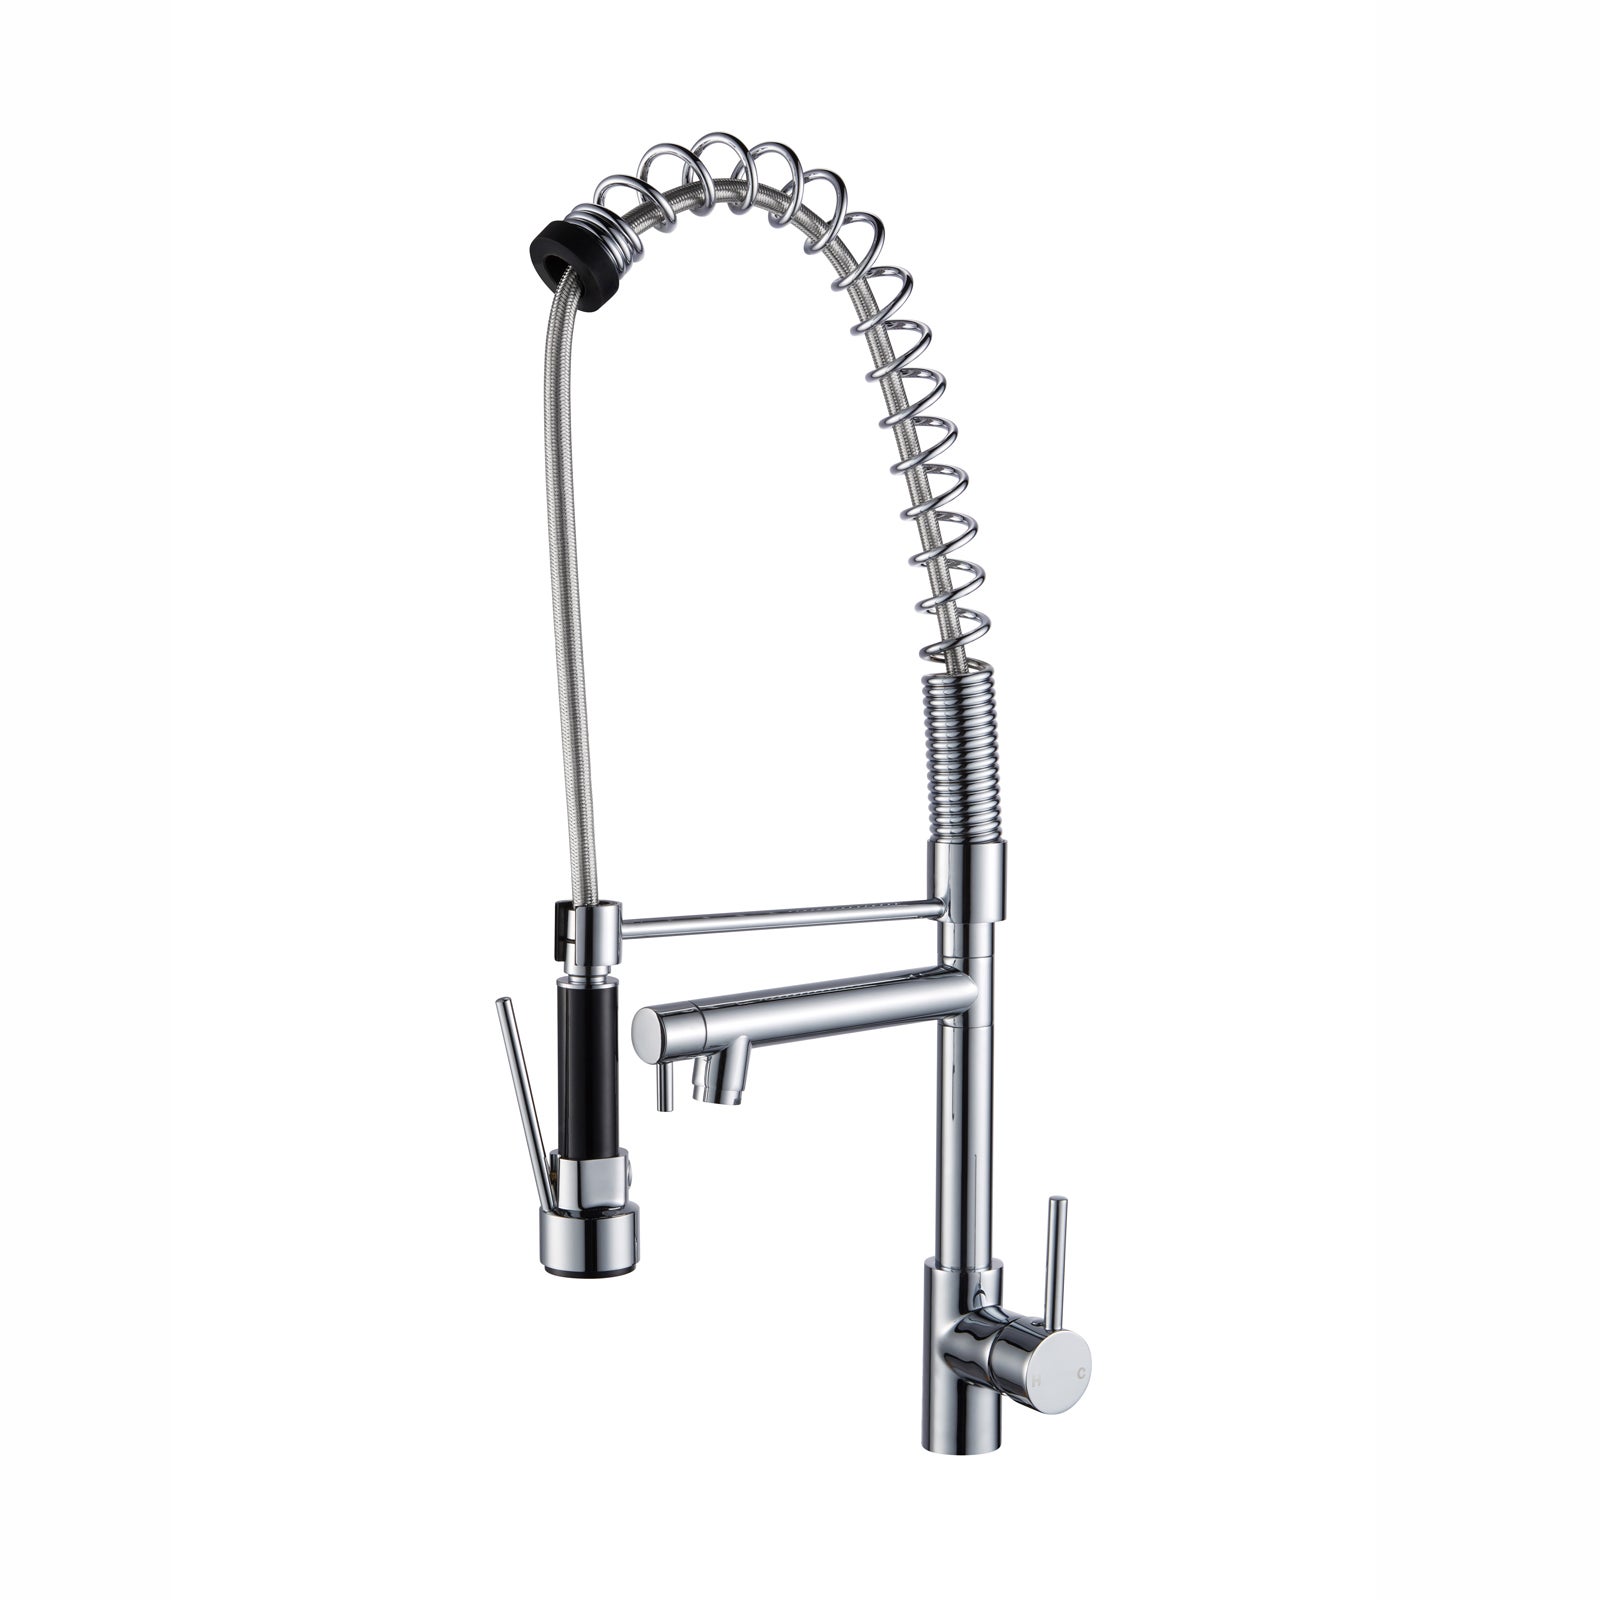 ACA Kitchen Mixer Tap Pull Down Spray Shower head Commercial